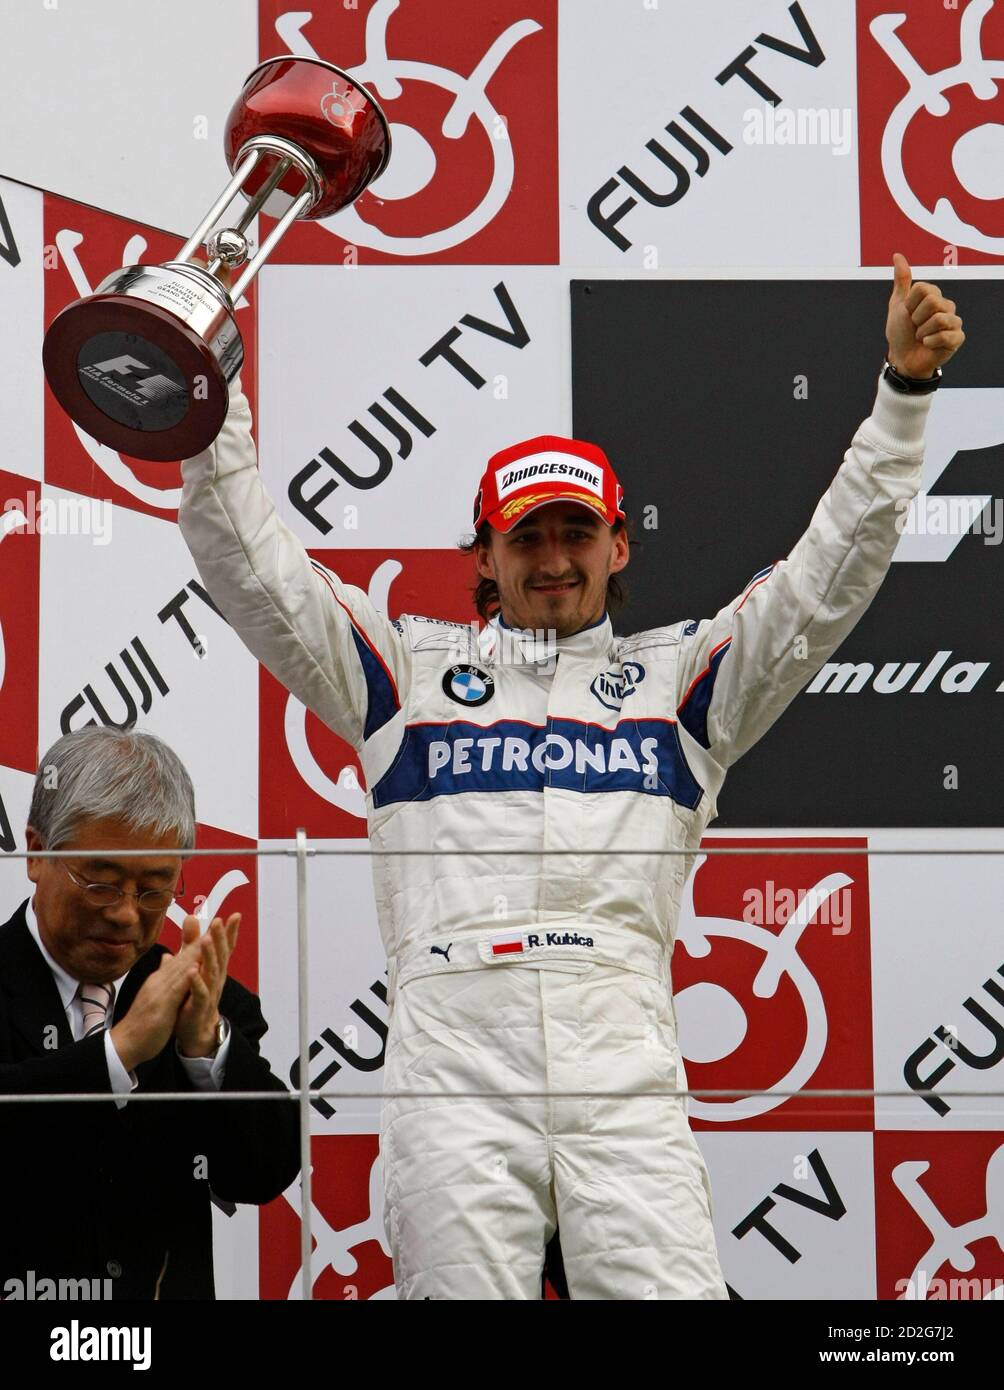 Bmw Sauber Formula One Driver Robert Kubica Of Poland Celebrates After Finishing Second In The Japanese F1 Grand Prix At Fuji Speedway In Oyama Central Japan October 12 08 Reuters Kim Kyung Hoon Japan